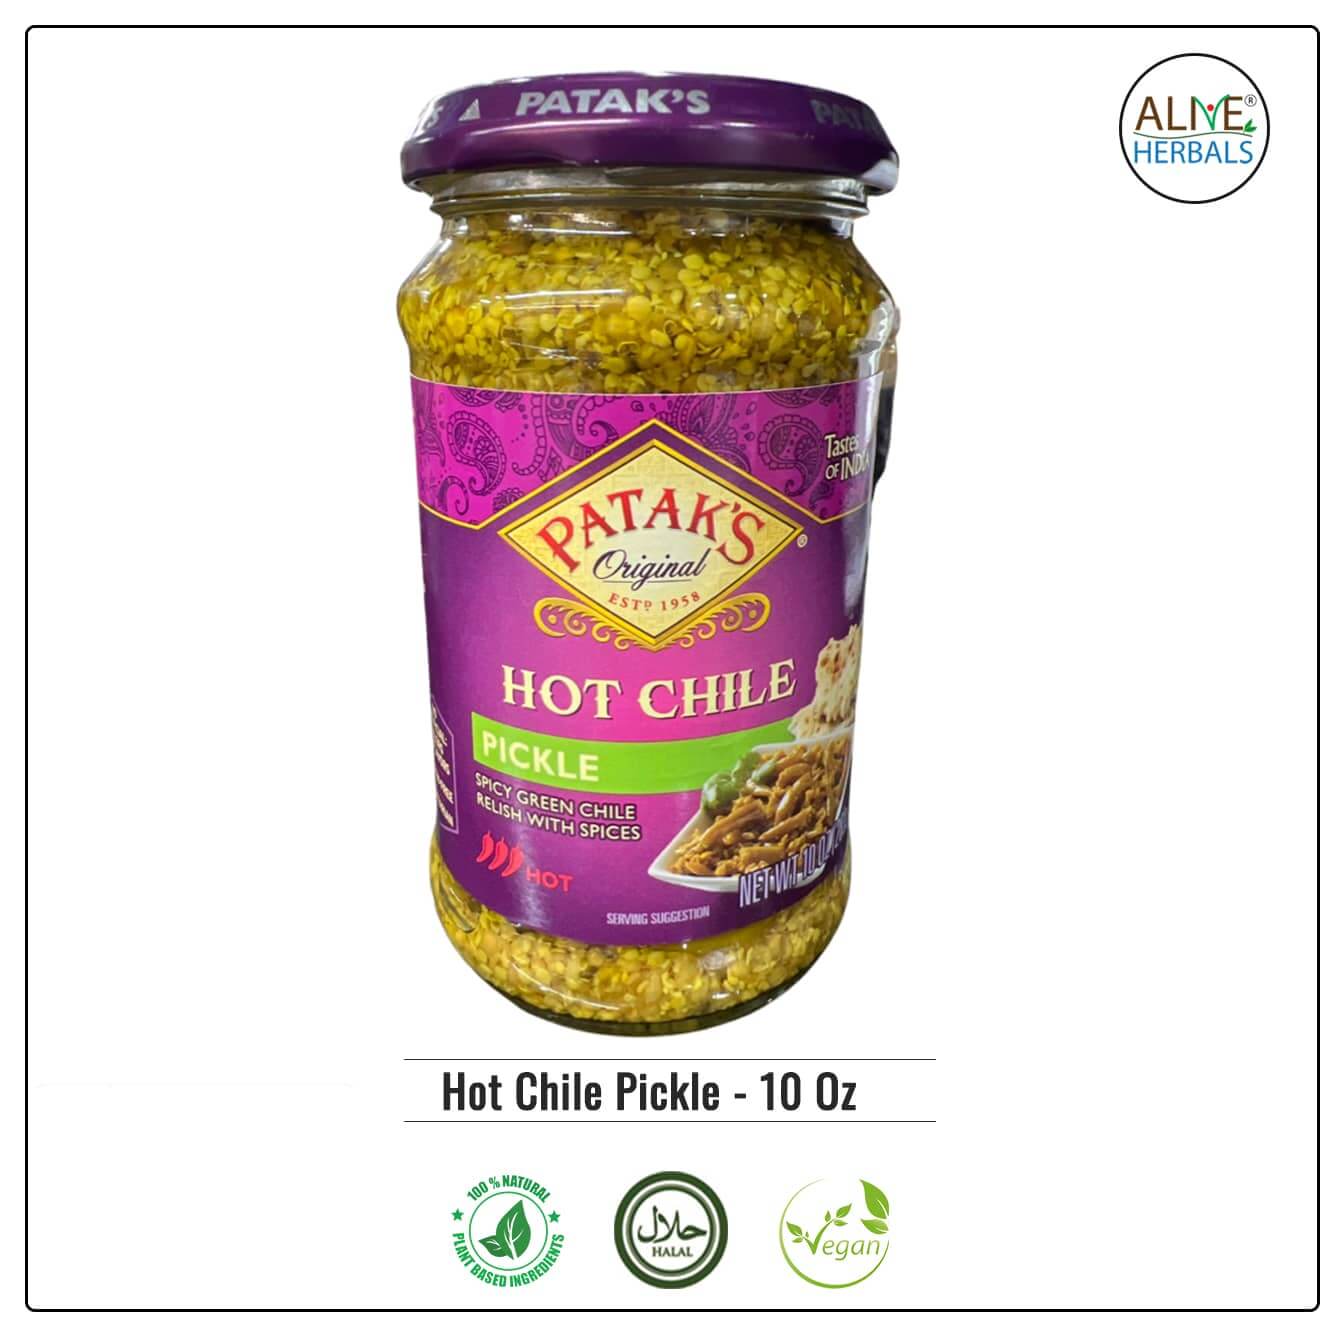 Hot Chile Pickle - Alive Herbals